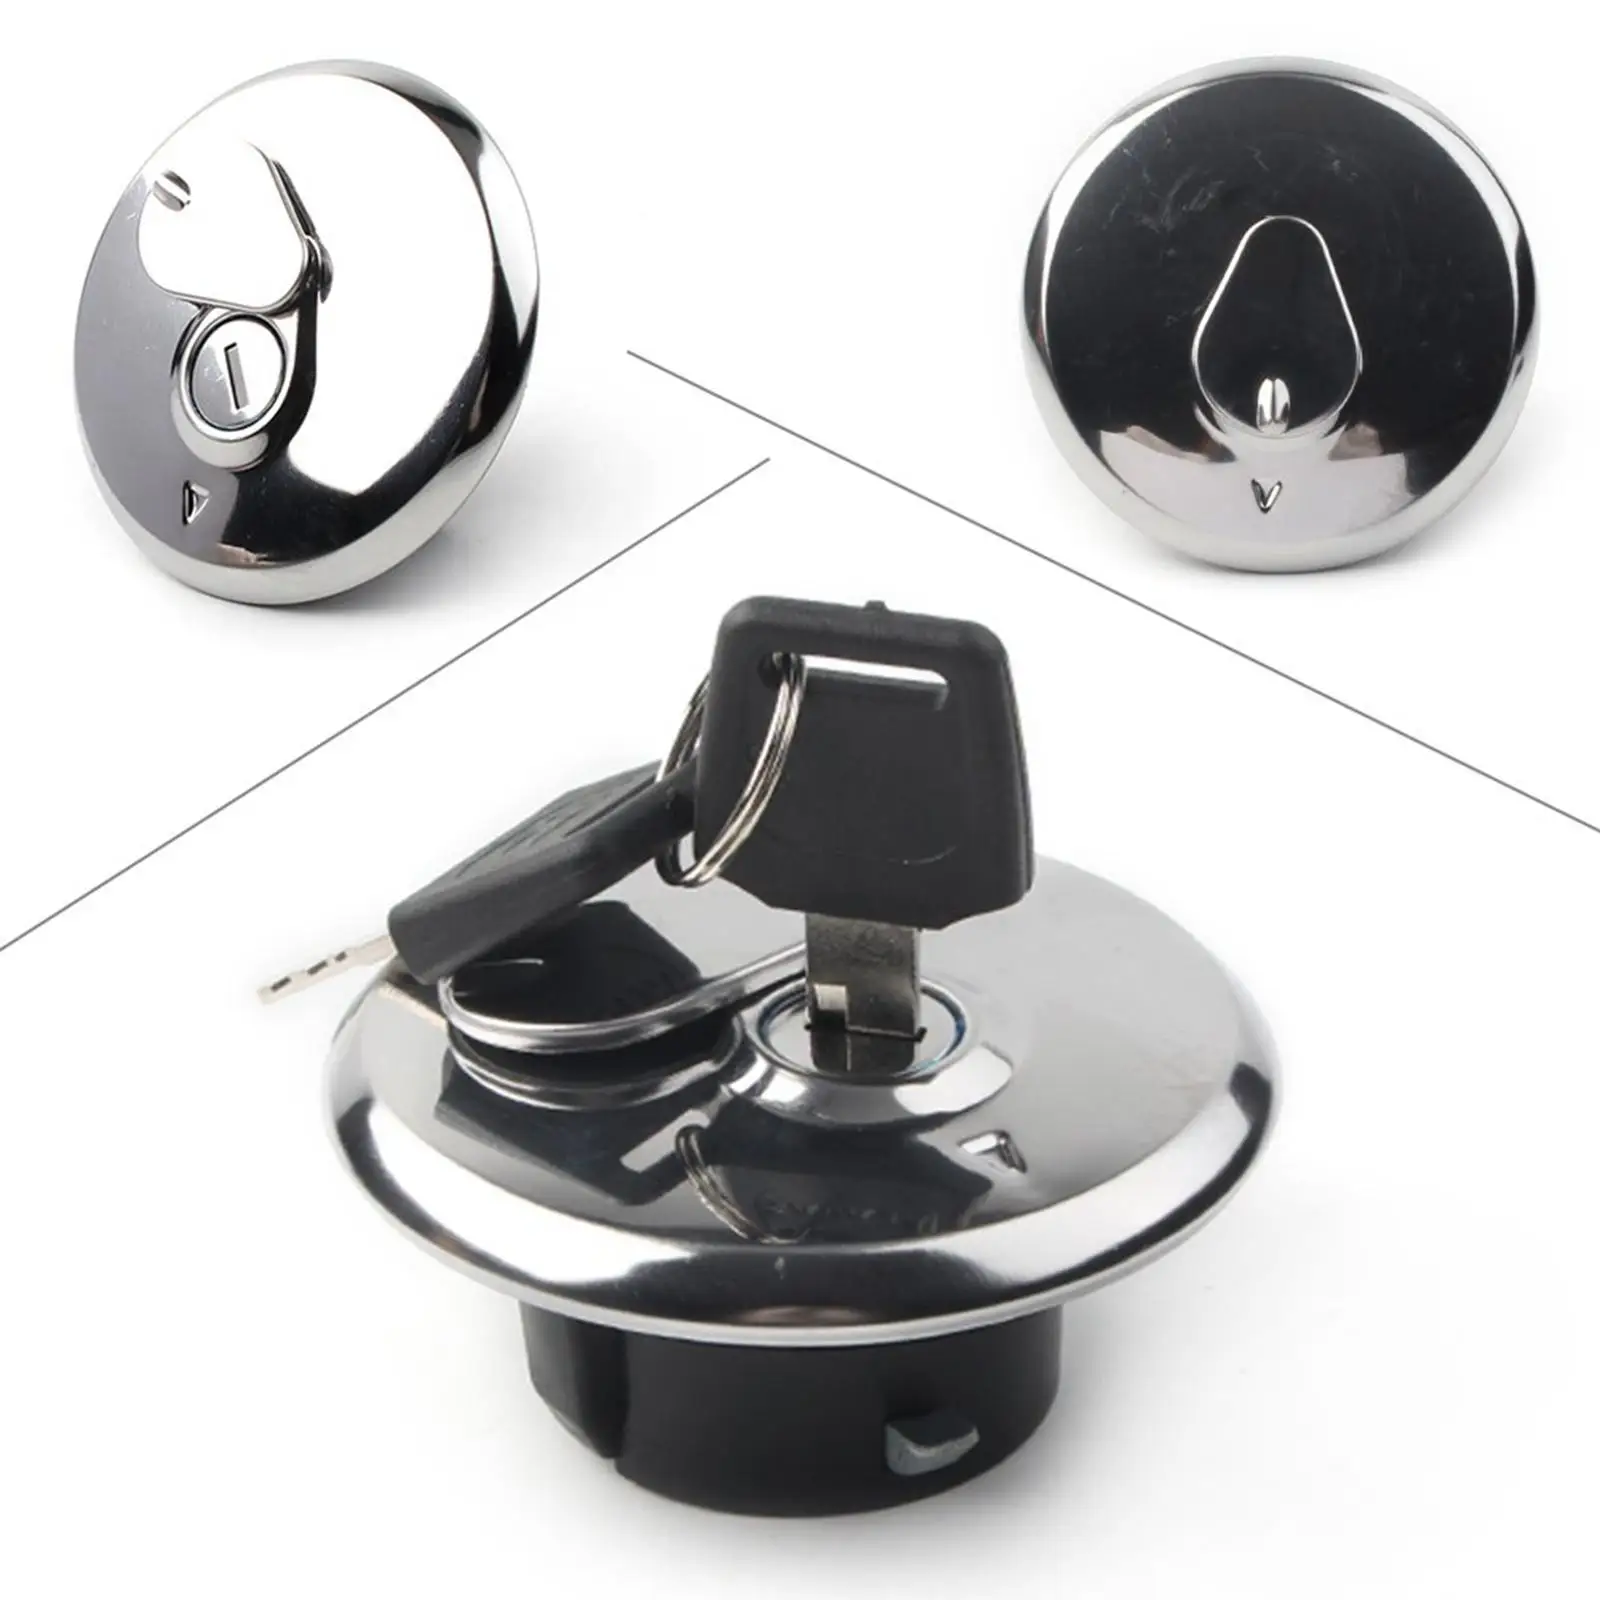 CNC Aluminum Motorbike Fuel Gas Tank Cap Cover, with Lock Keys Direct Replaces for Suzuki Gn125